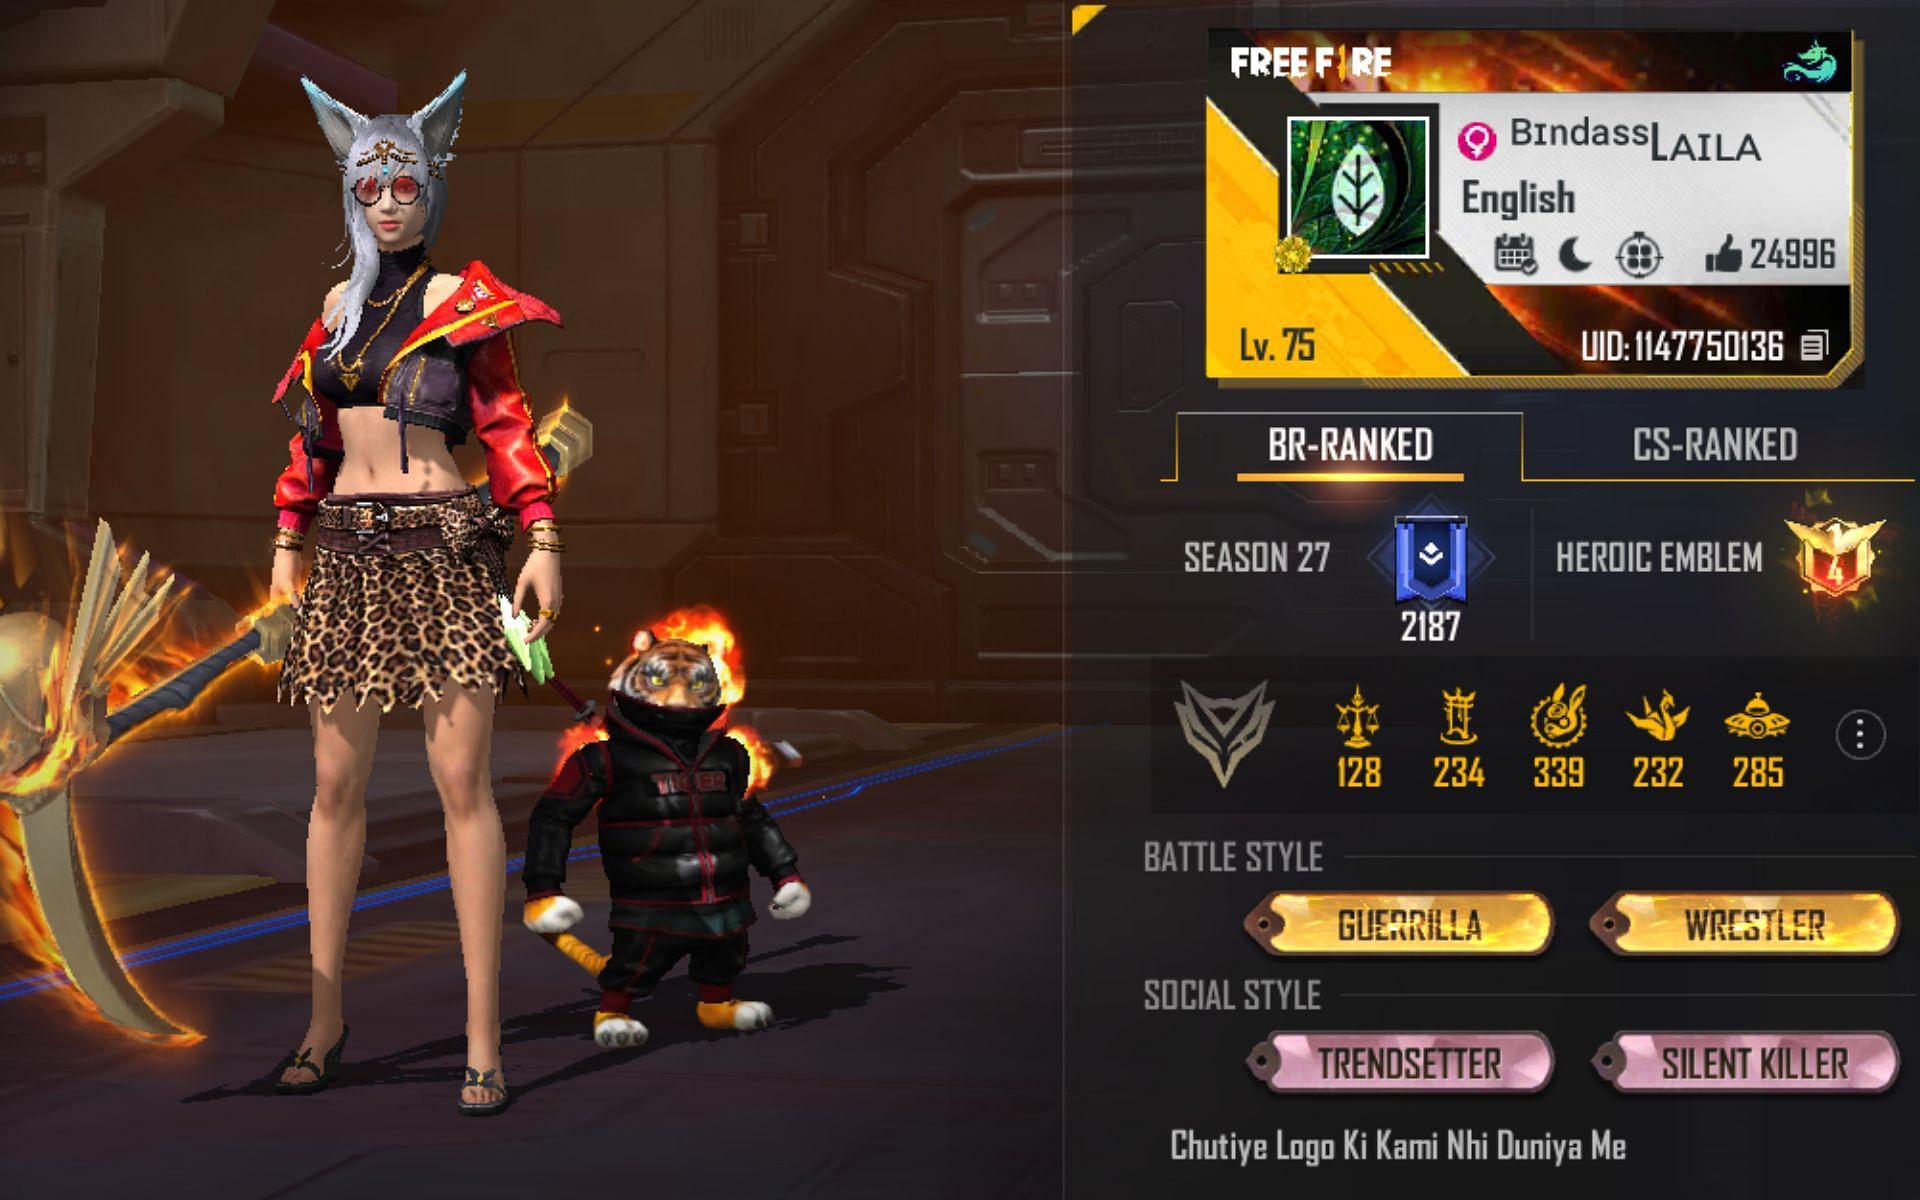 Gaming With Laila's Free Fire ID, K/D ratio, stats, rank, YouTube 